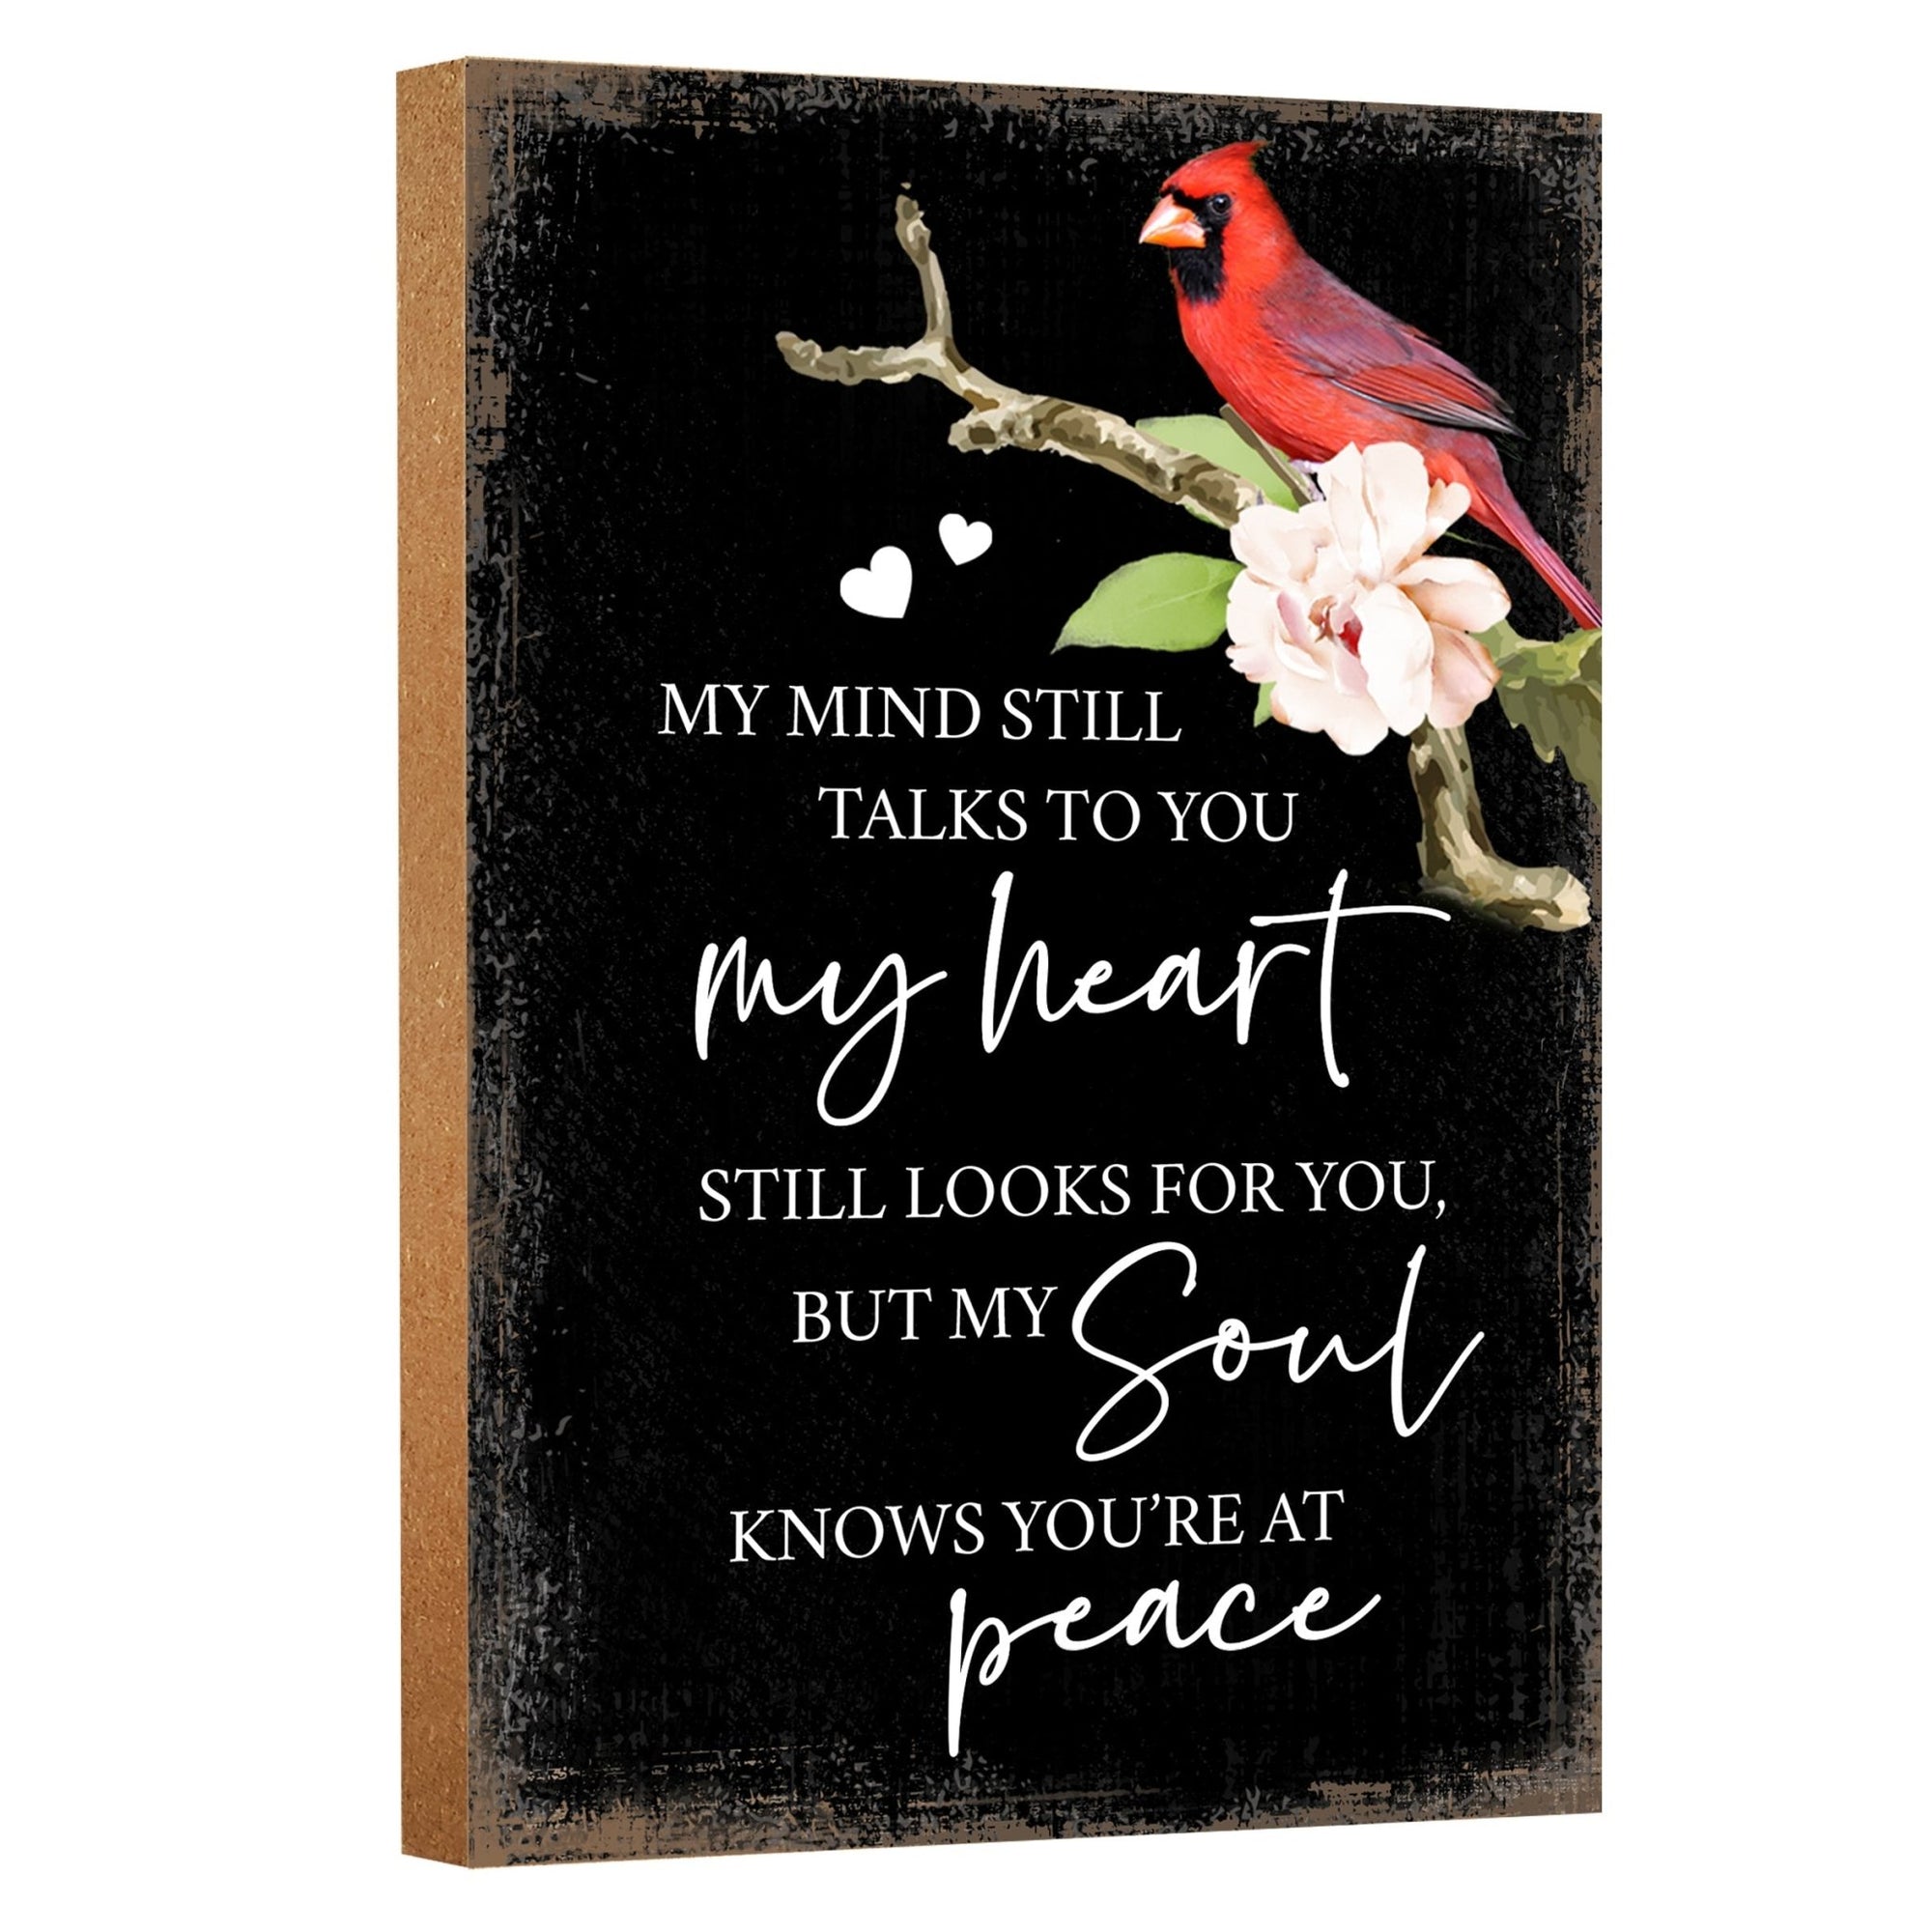 A tabletop memorial sign featuring a beautiful cardinal, a touching memorial gift for the loss of a loved one.